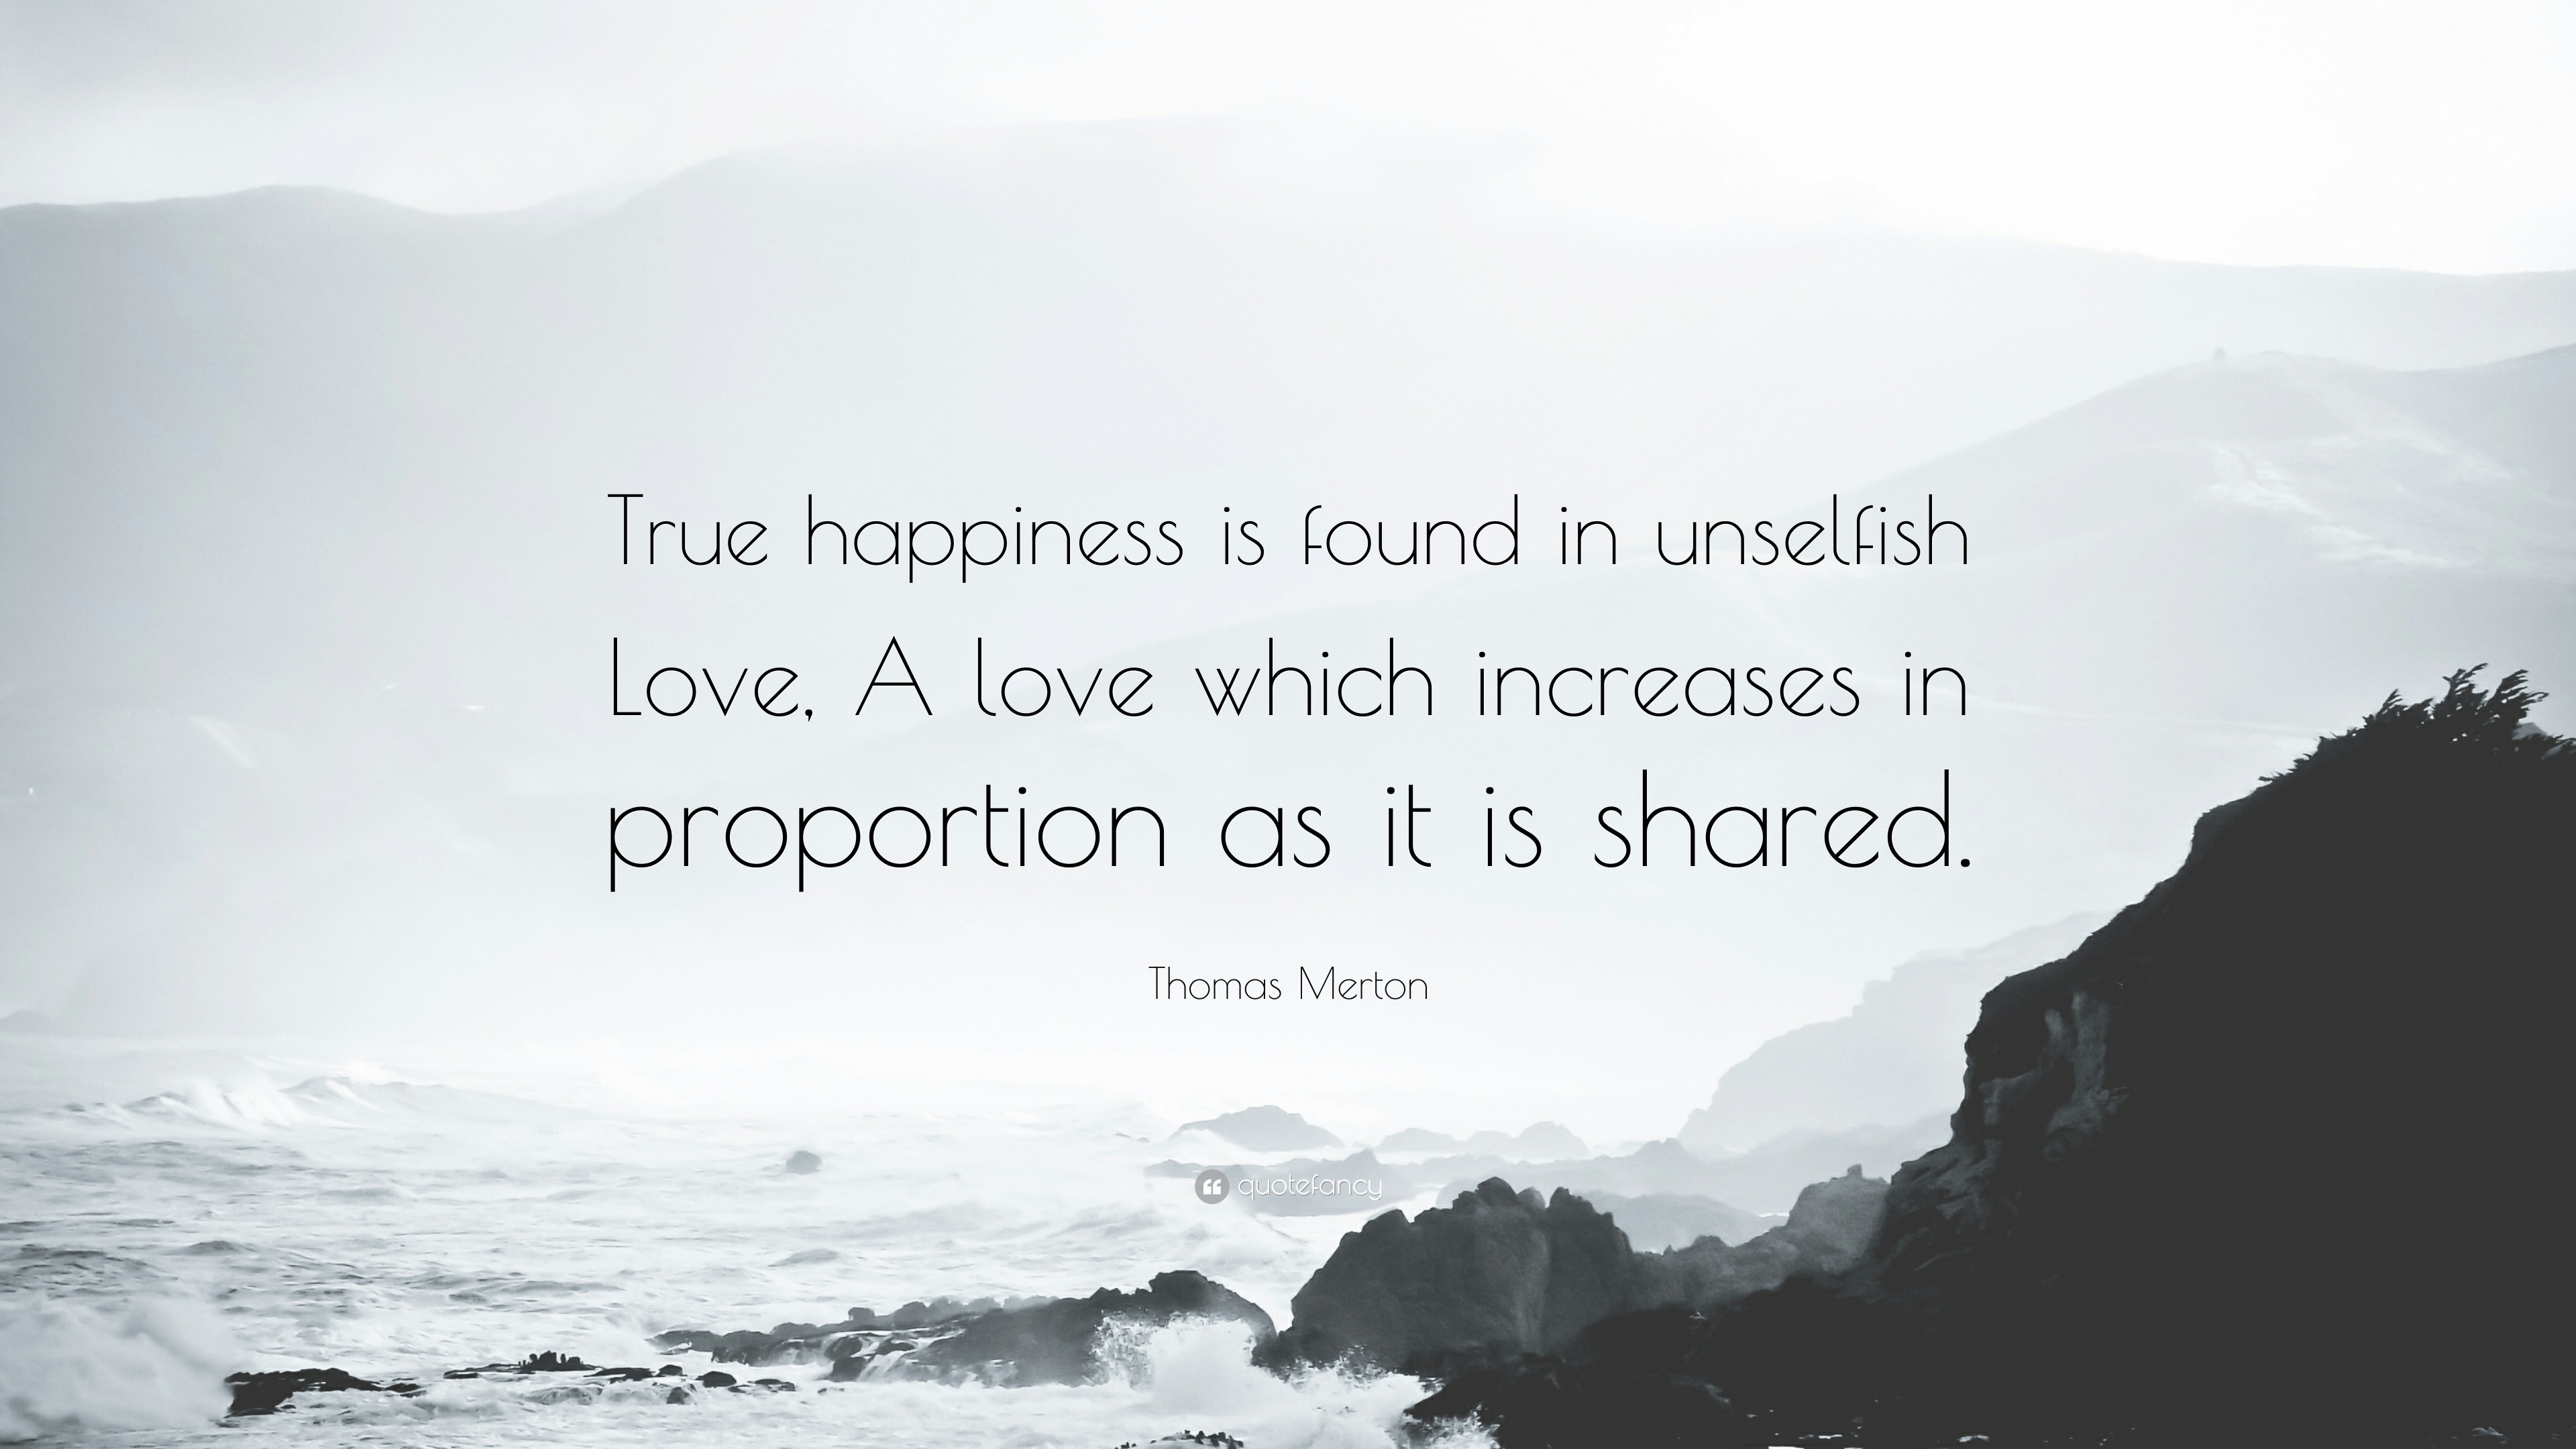 Thomas Merton Quote “True happiness is found in unselfish Love A love which